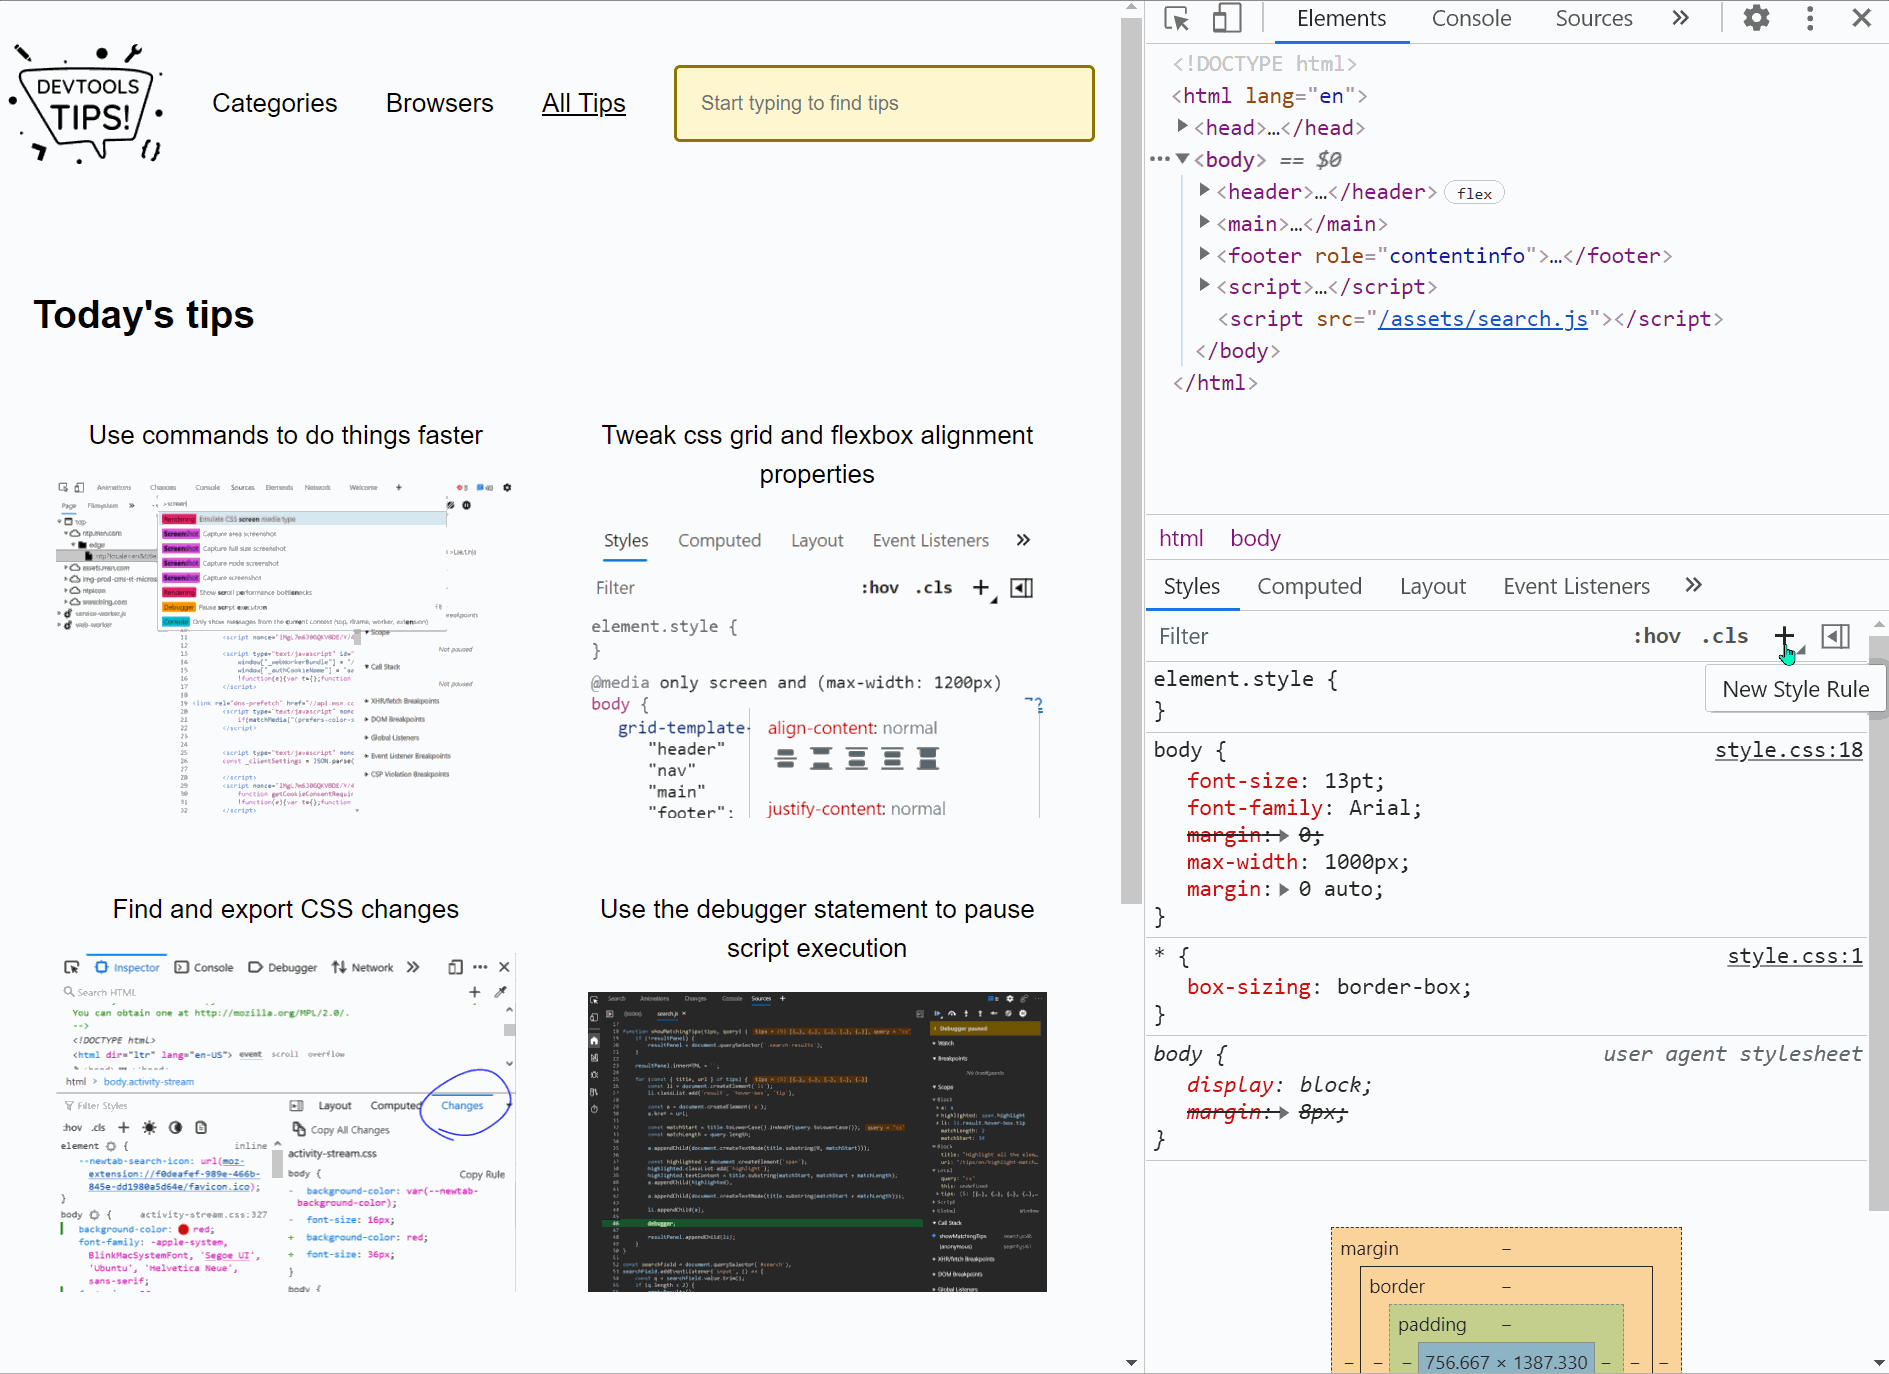 Animation showing how adding the rule in the styles pane if Chrome DevTools outlines all elements in the page.